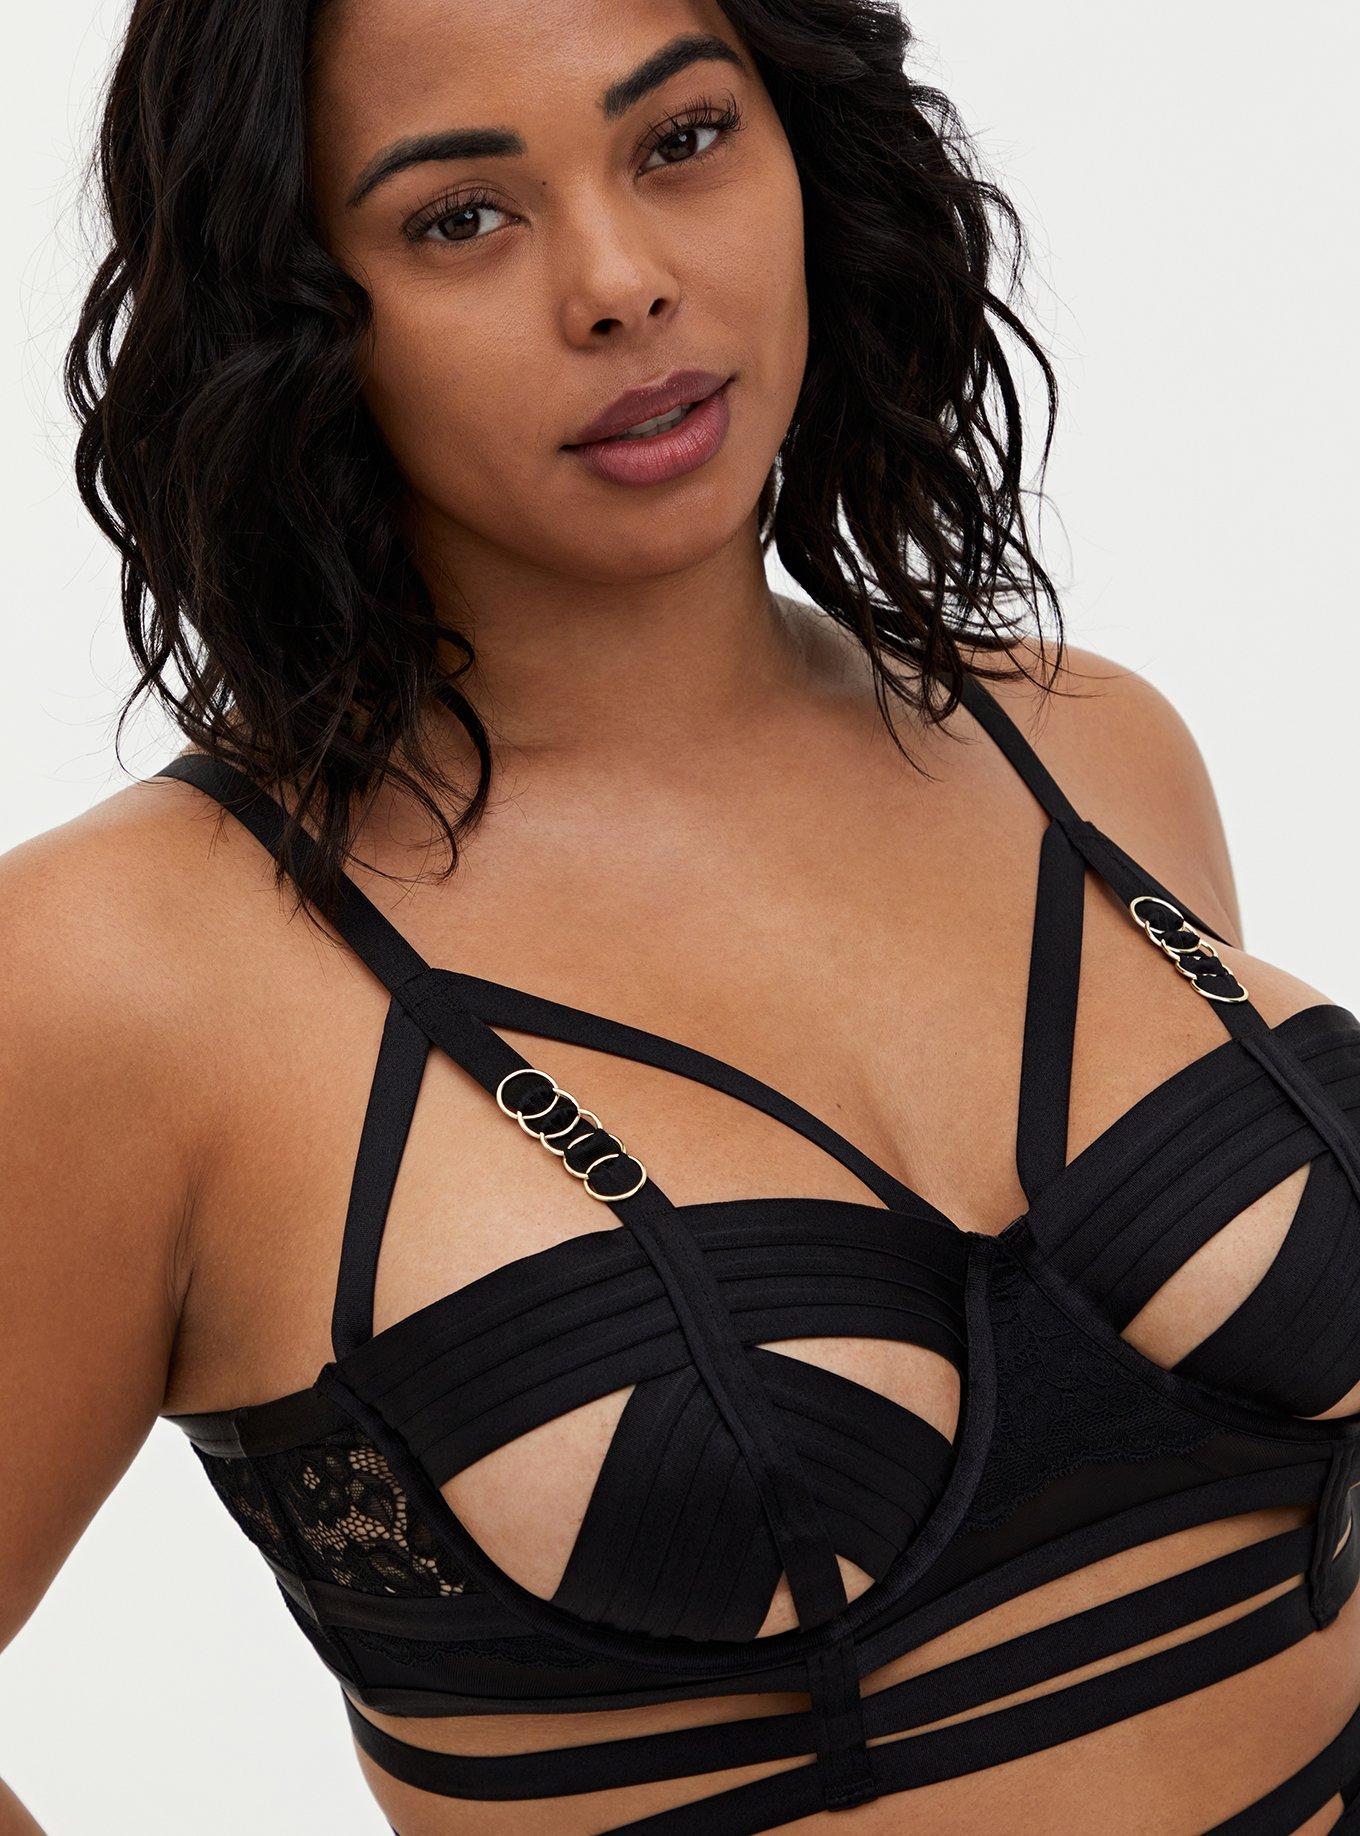 Torrid bra black longline unlined underwire dot lace Size 4X - $49 New With  Tags - From Cynthia